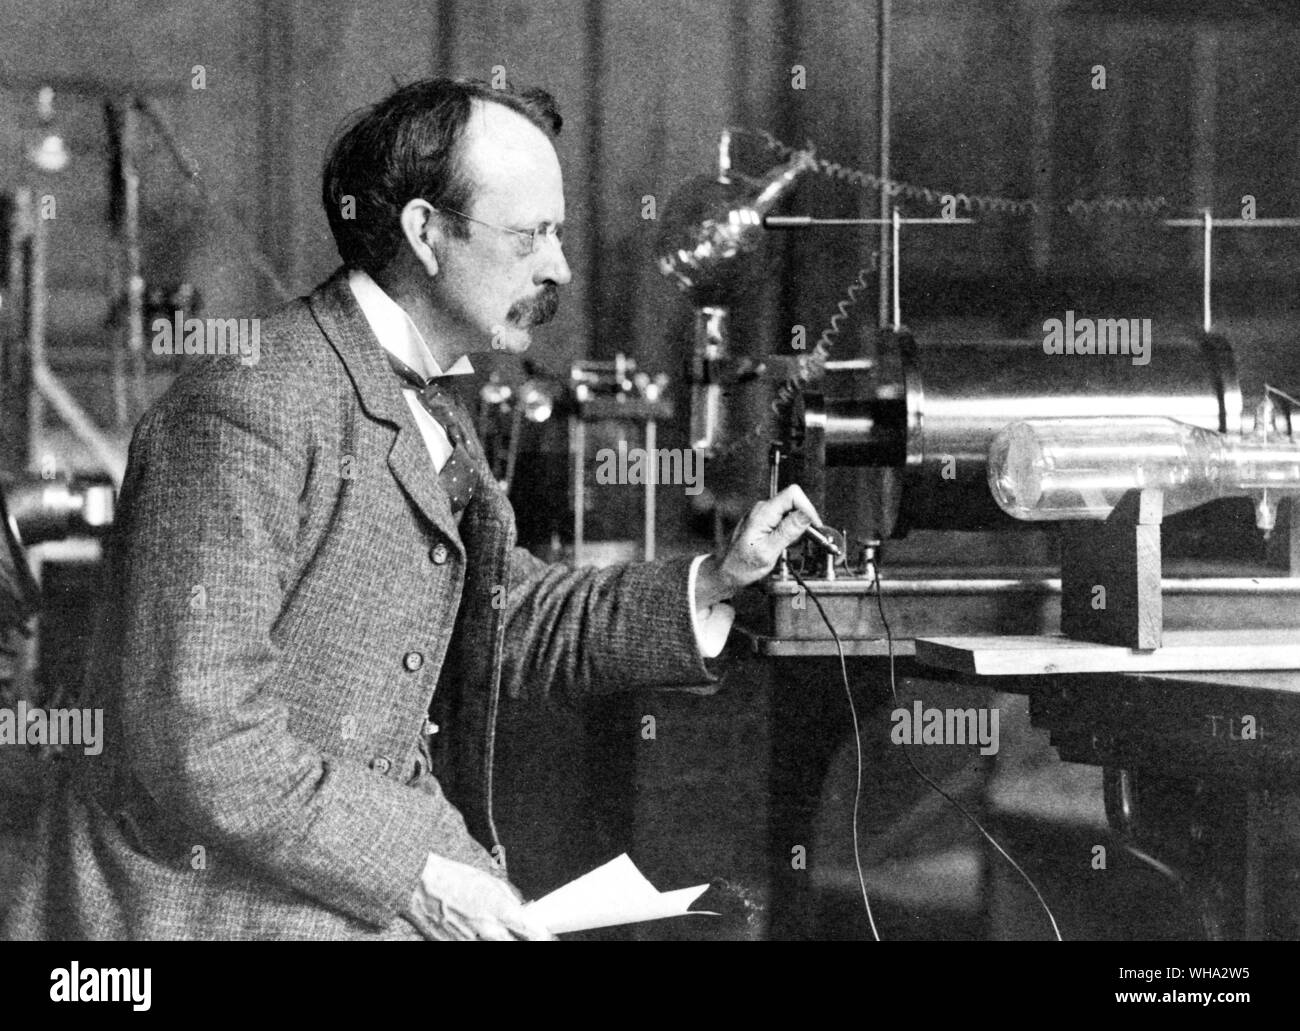 Sir J.J. Thomson with early equipment in the Cavendish Laboratory, Cambridge.. Thomson, Joseph John, Sir (J. J. Thomson) English physicist. discovered electron. Nobel Prize in Physics 1906. president of Royal Society 1915-1920  1856-1940 . . Stock Photo